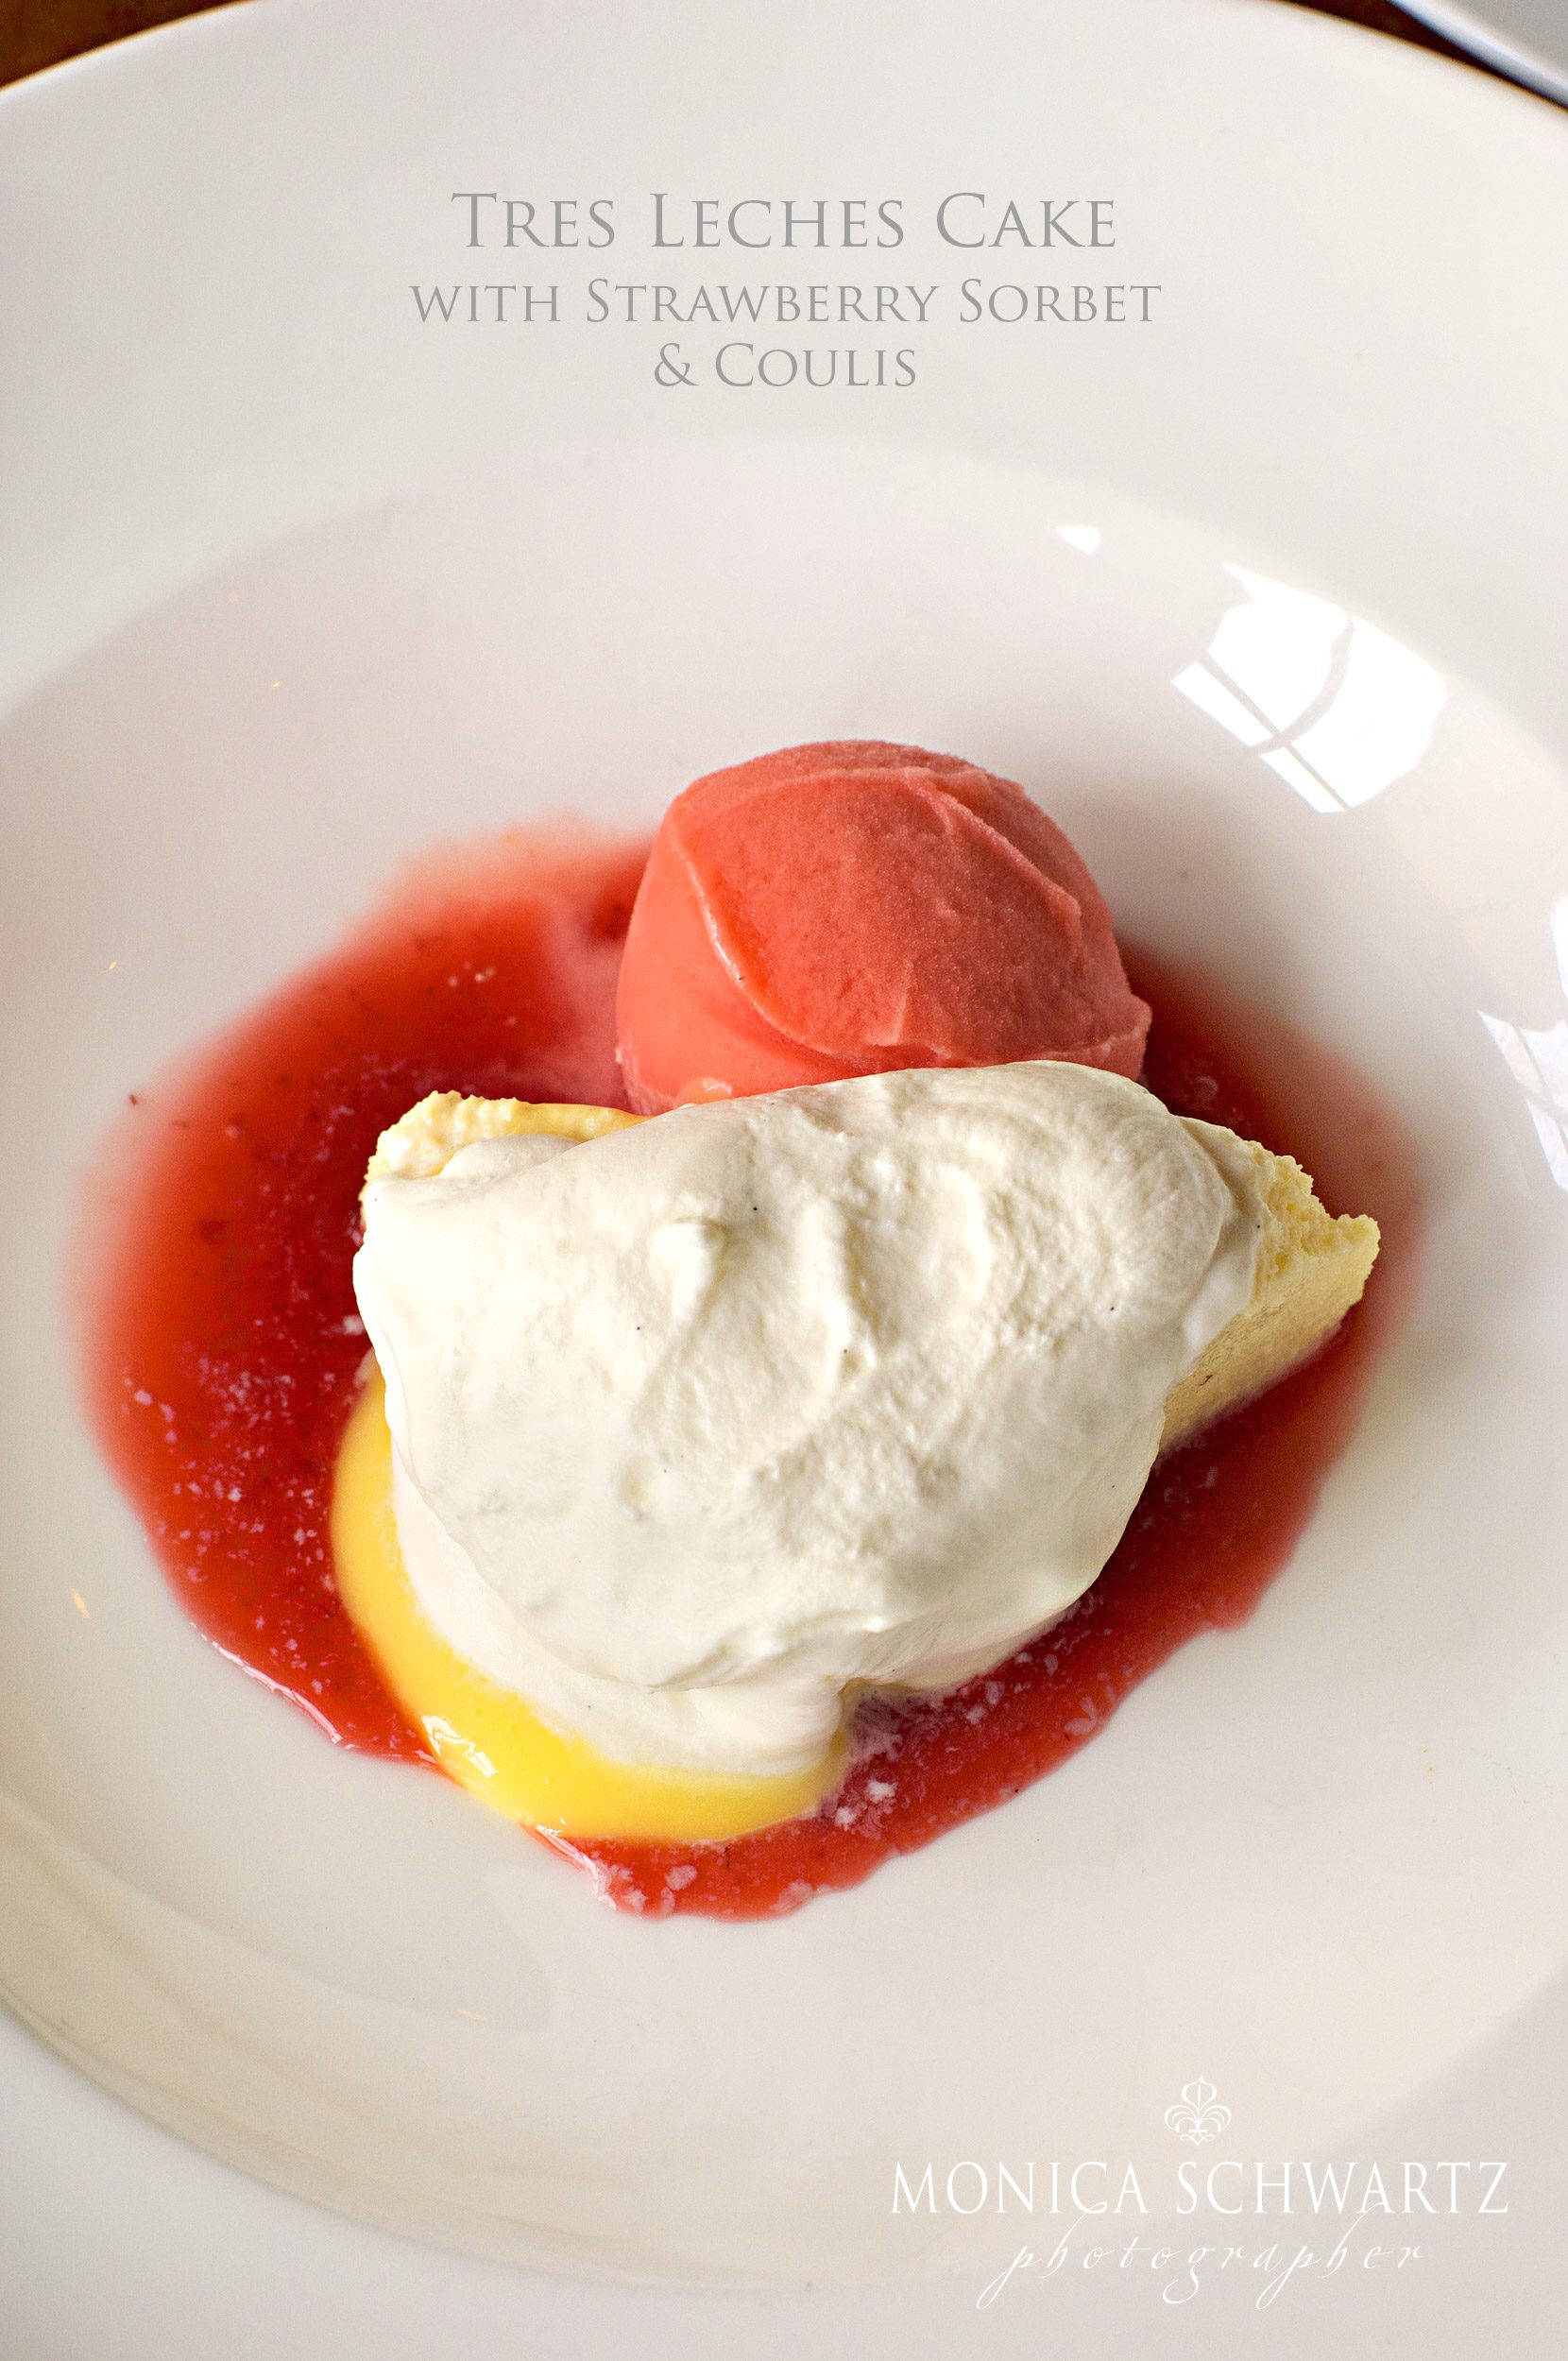 Tres-Leches-Cake-with-Strawberry-Sorbet-and-coulis-at-El-Dorado-Kitchen-restaurant-in-Sonoma-California-Wine-Country